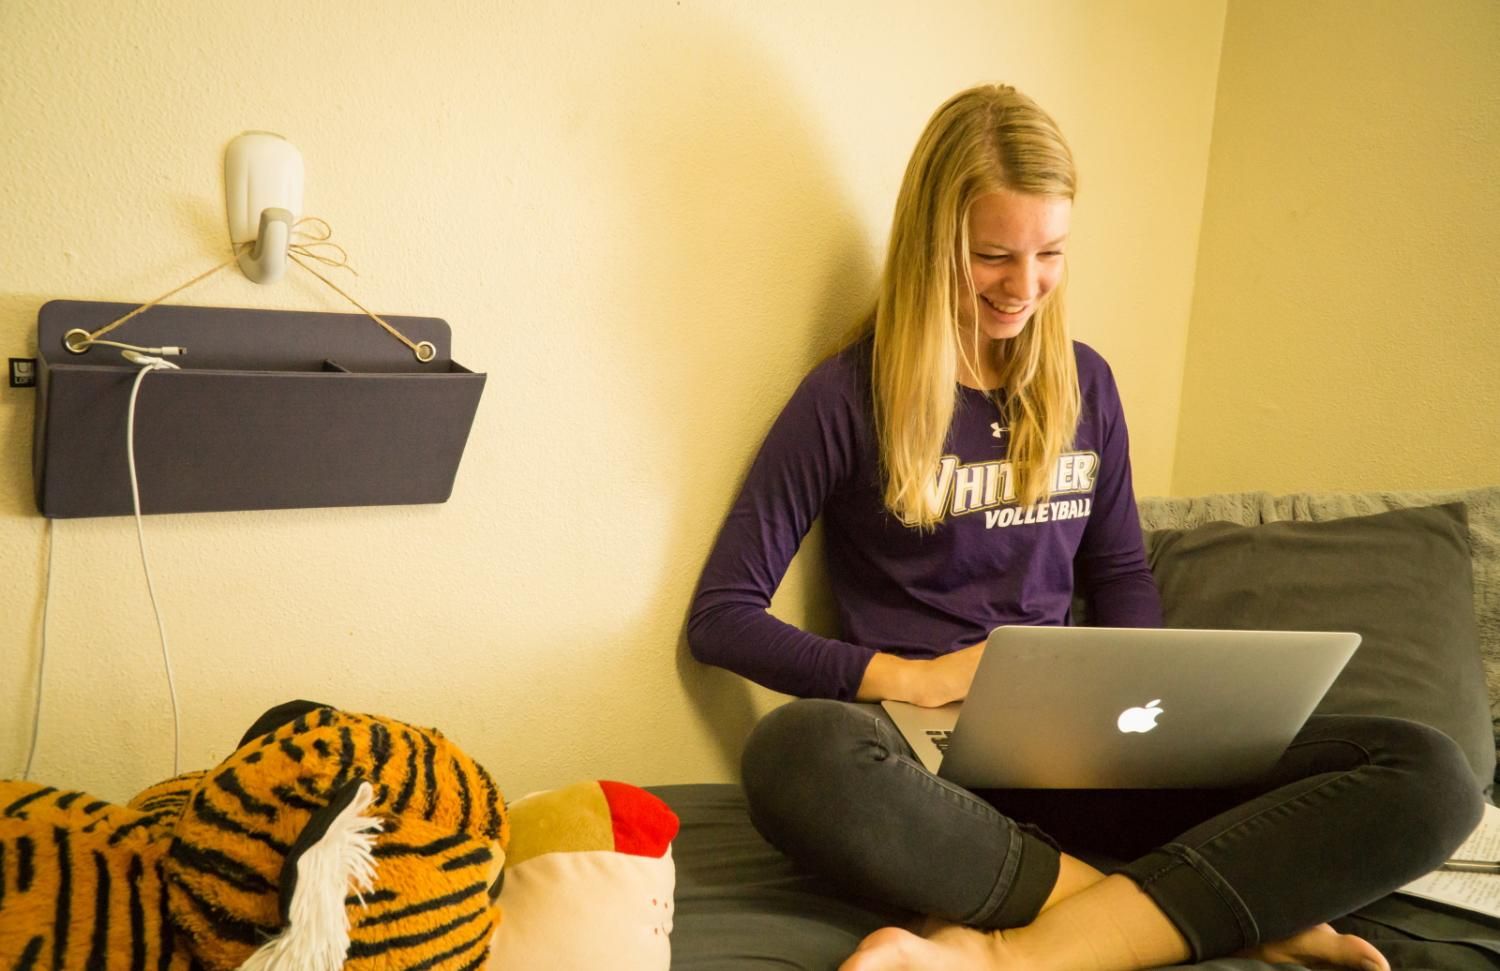 Student in residence hall